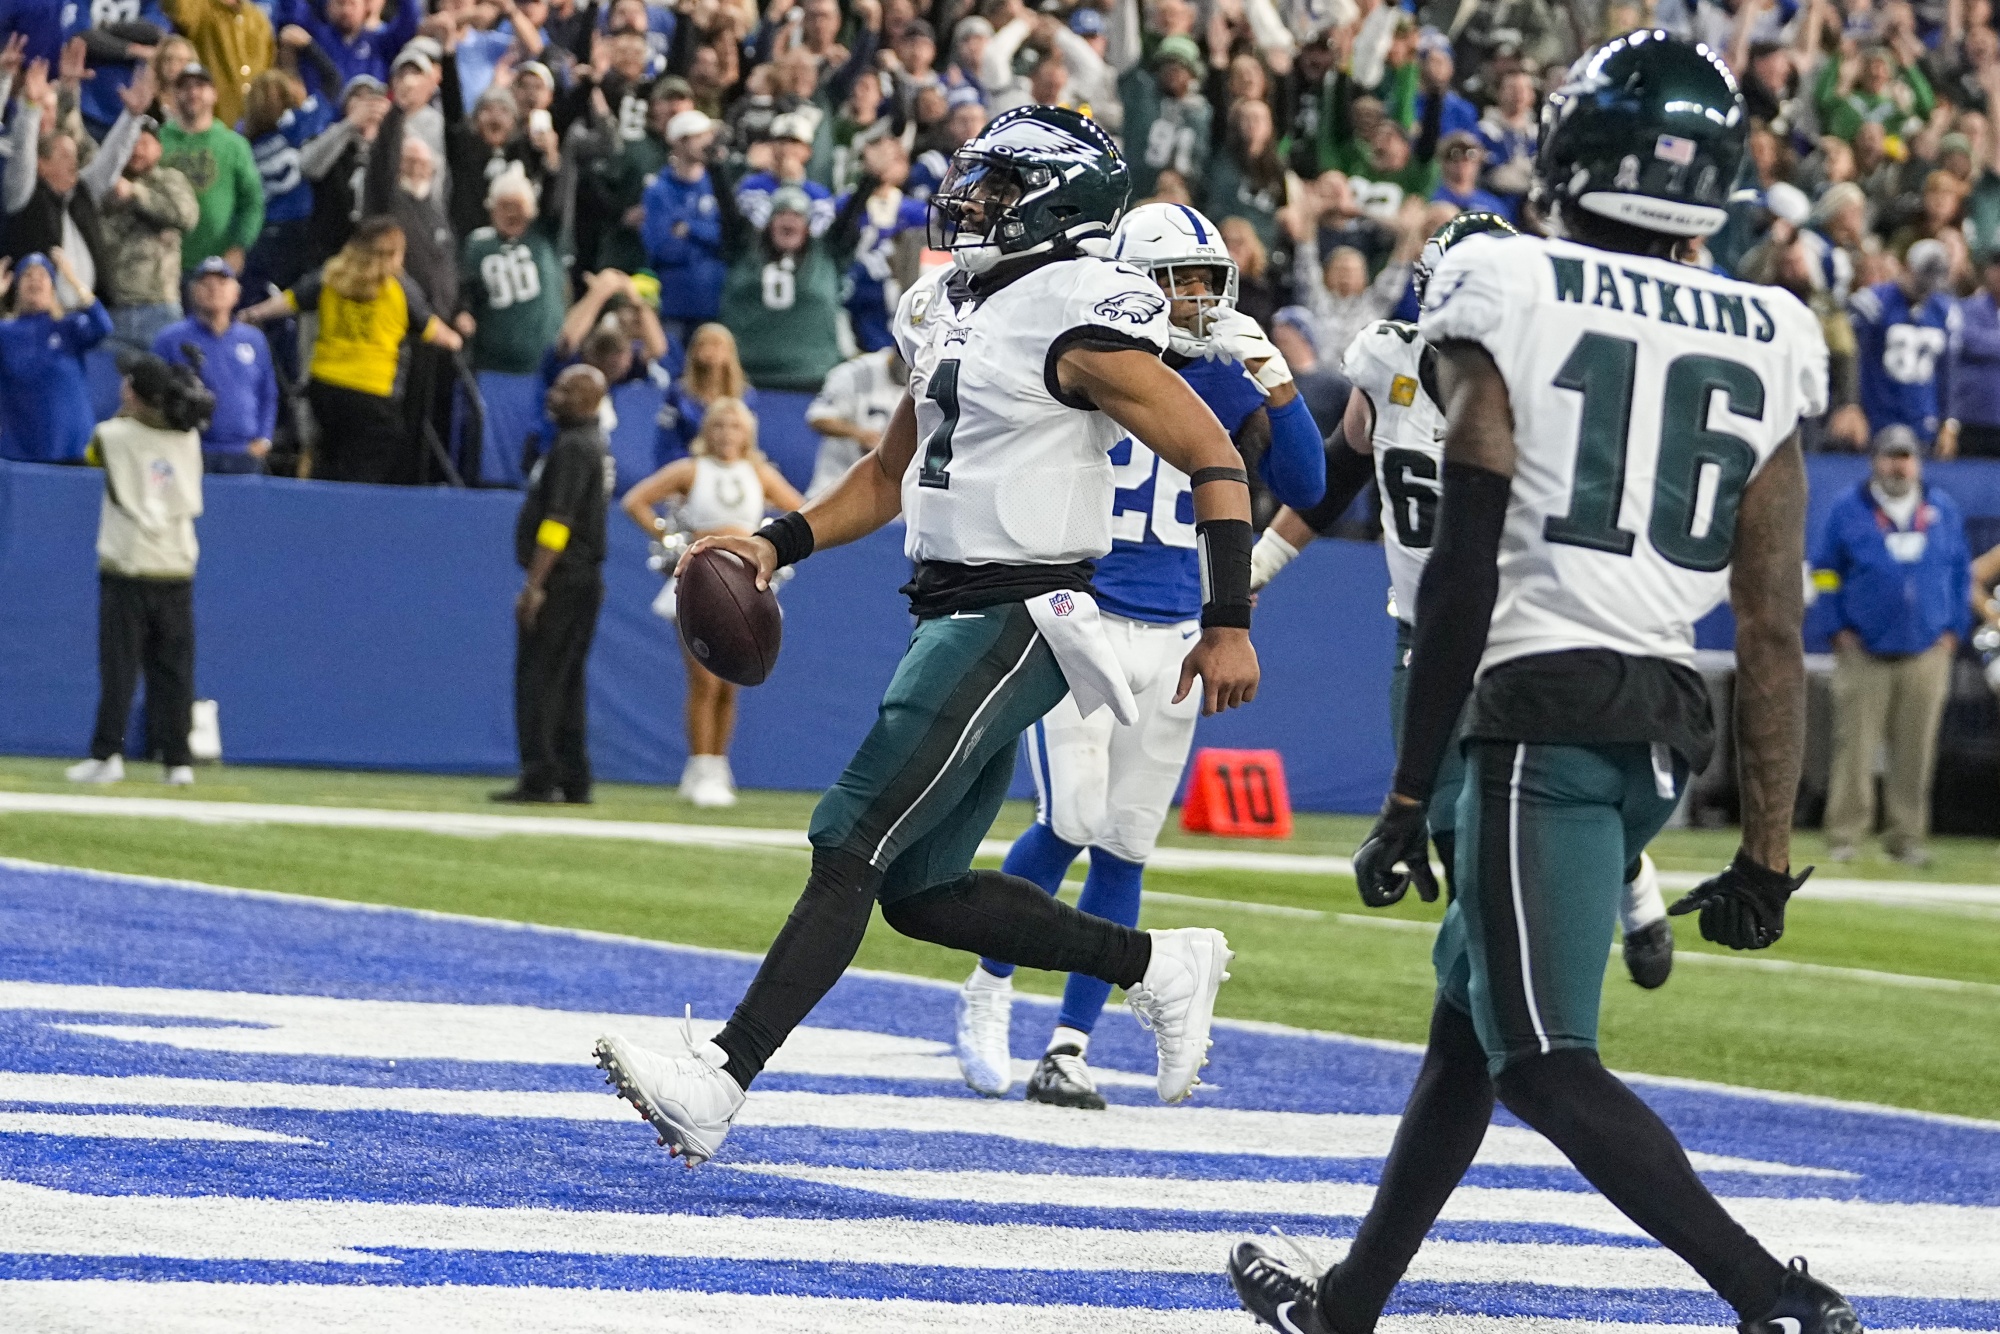 Jalen Hurts' Late TD Run Gives Eagles 17-16 Win Over Colts - Bloomberg